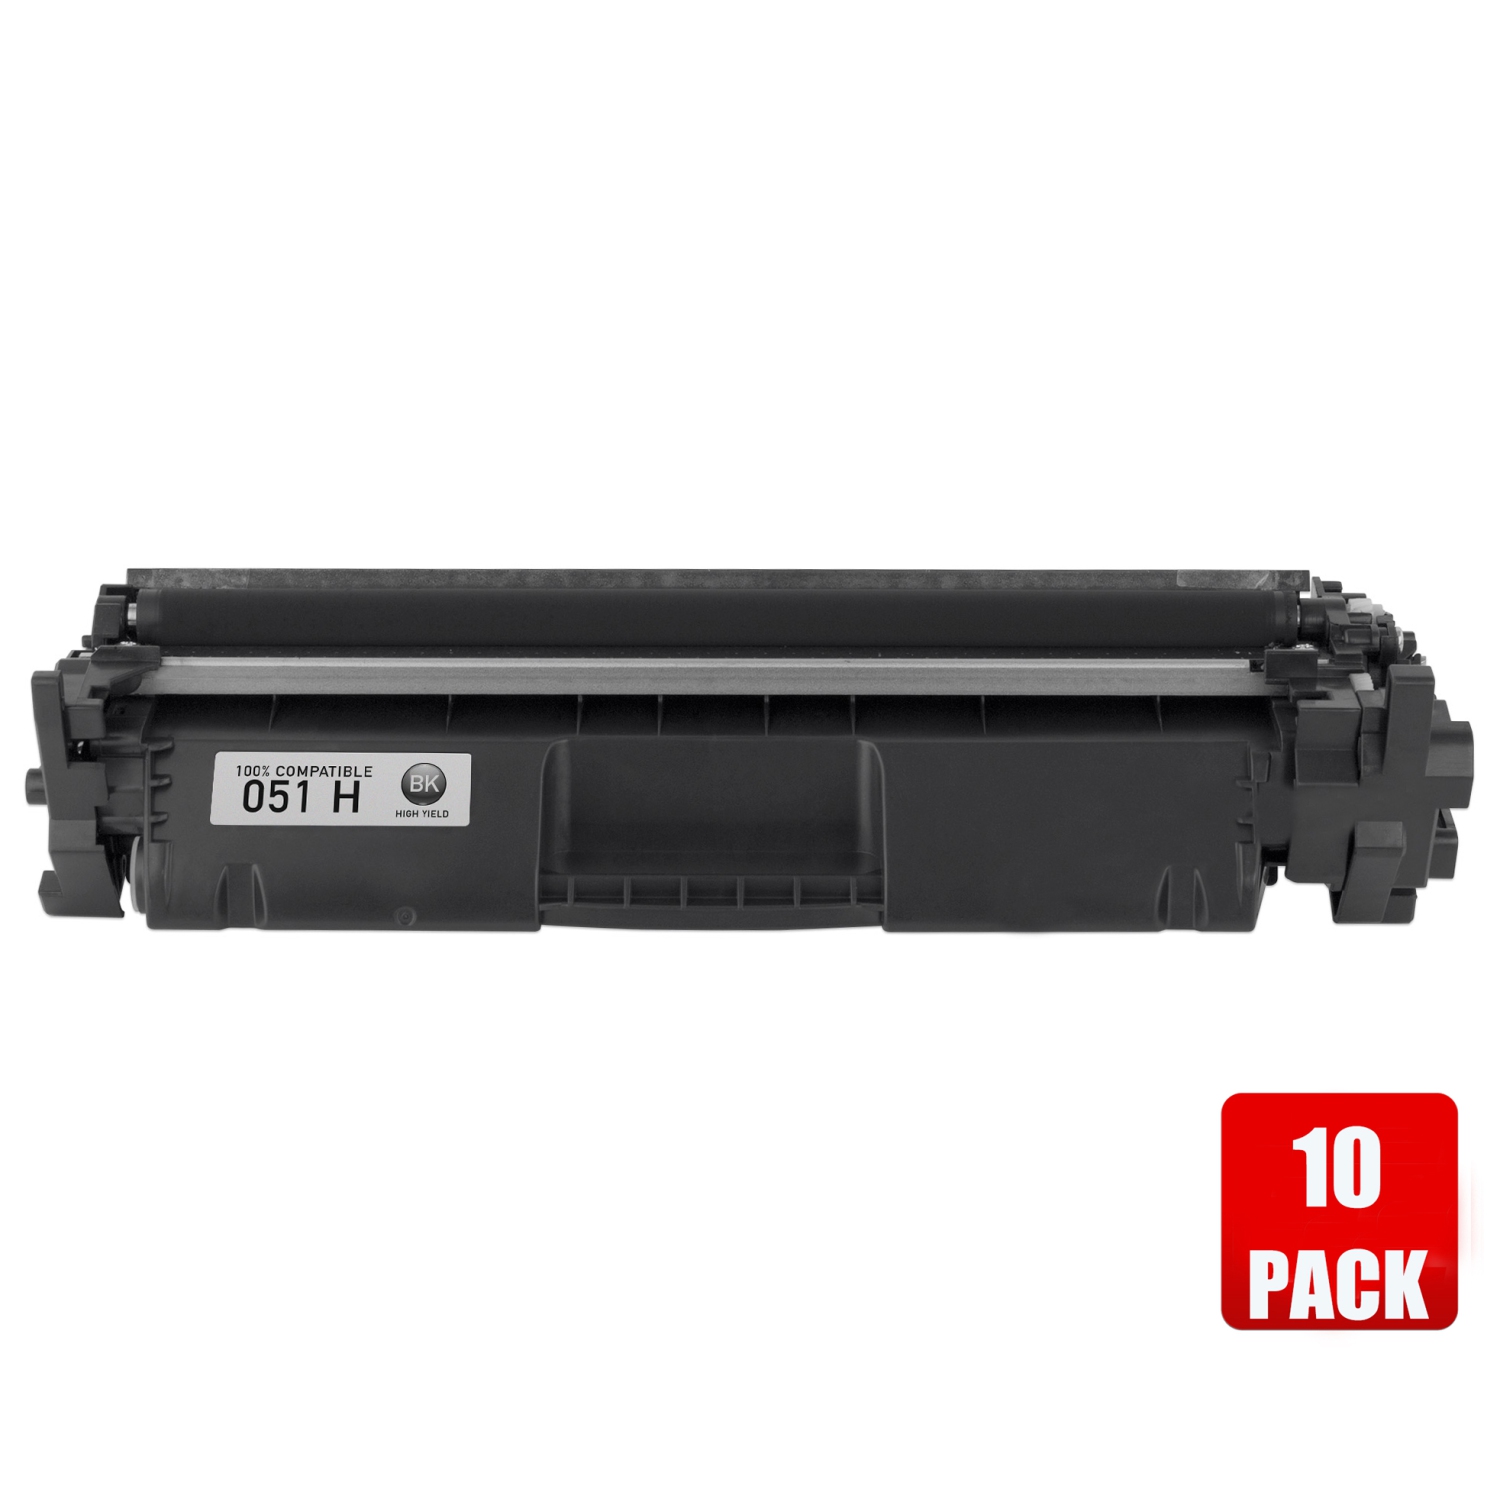 Prime 10 Pack Canon 051H/Canon-051H/051/051H High Yield Black Compatible Toner Cartridge # FREE SHIPPING